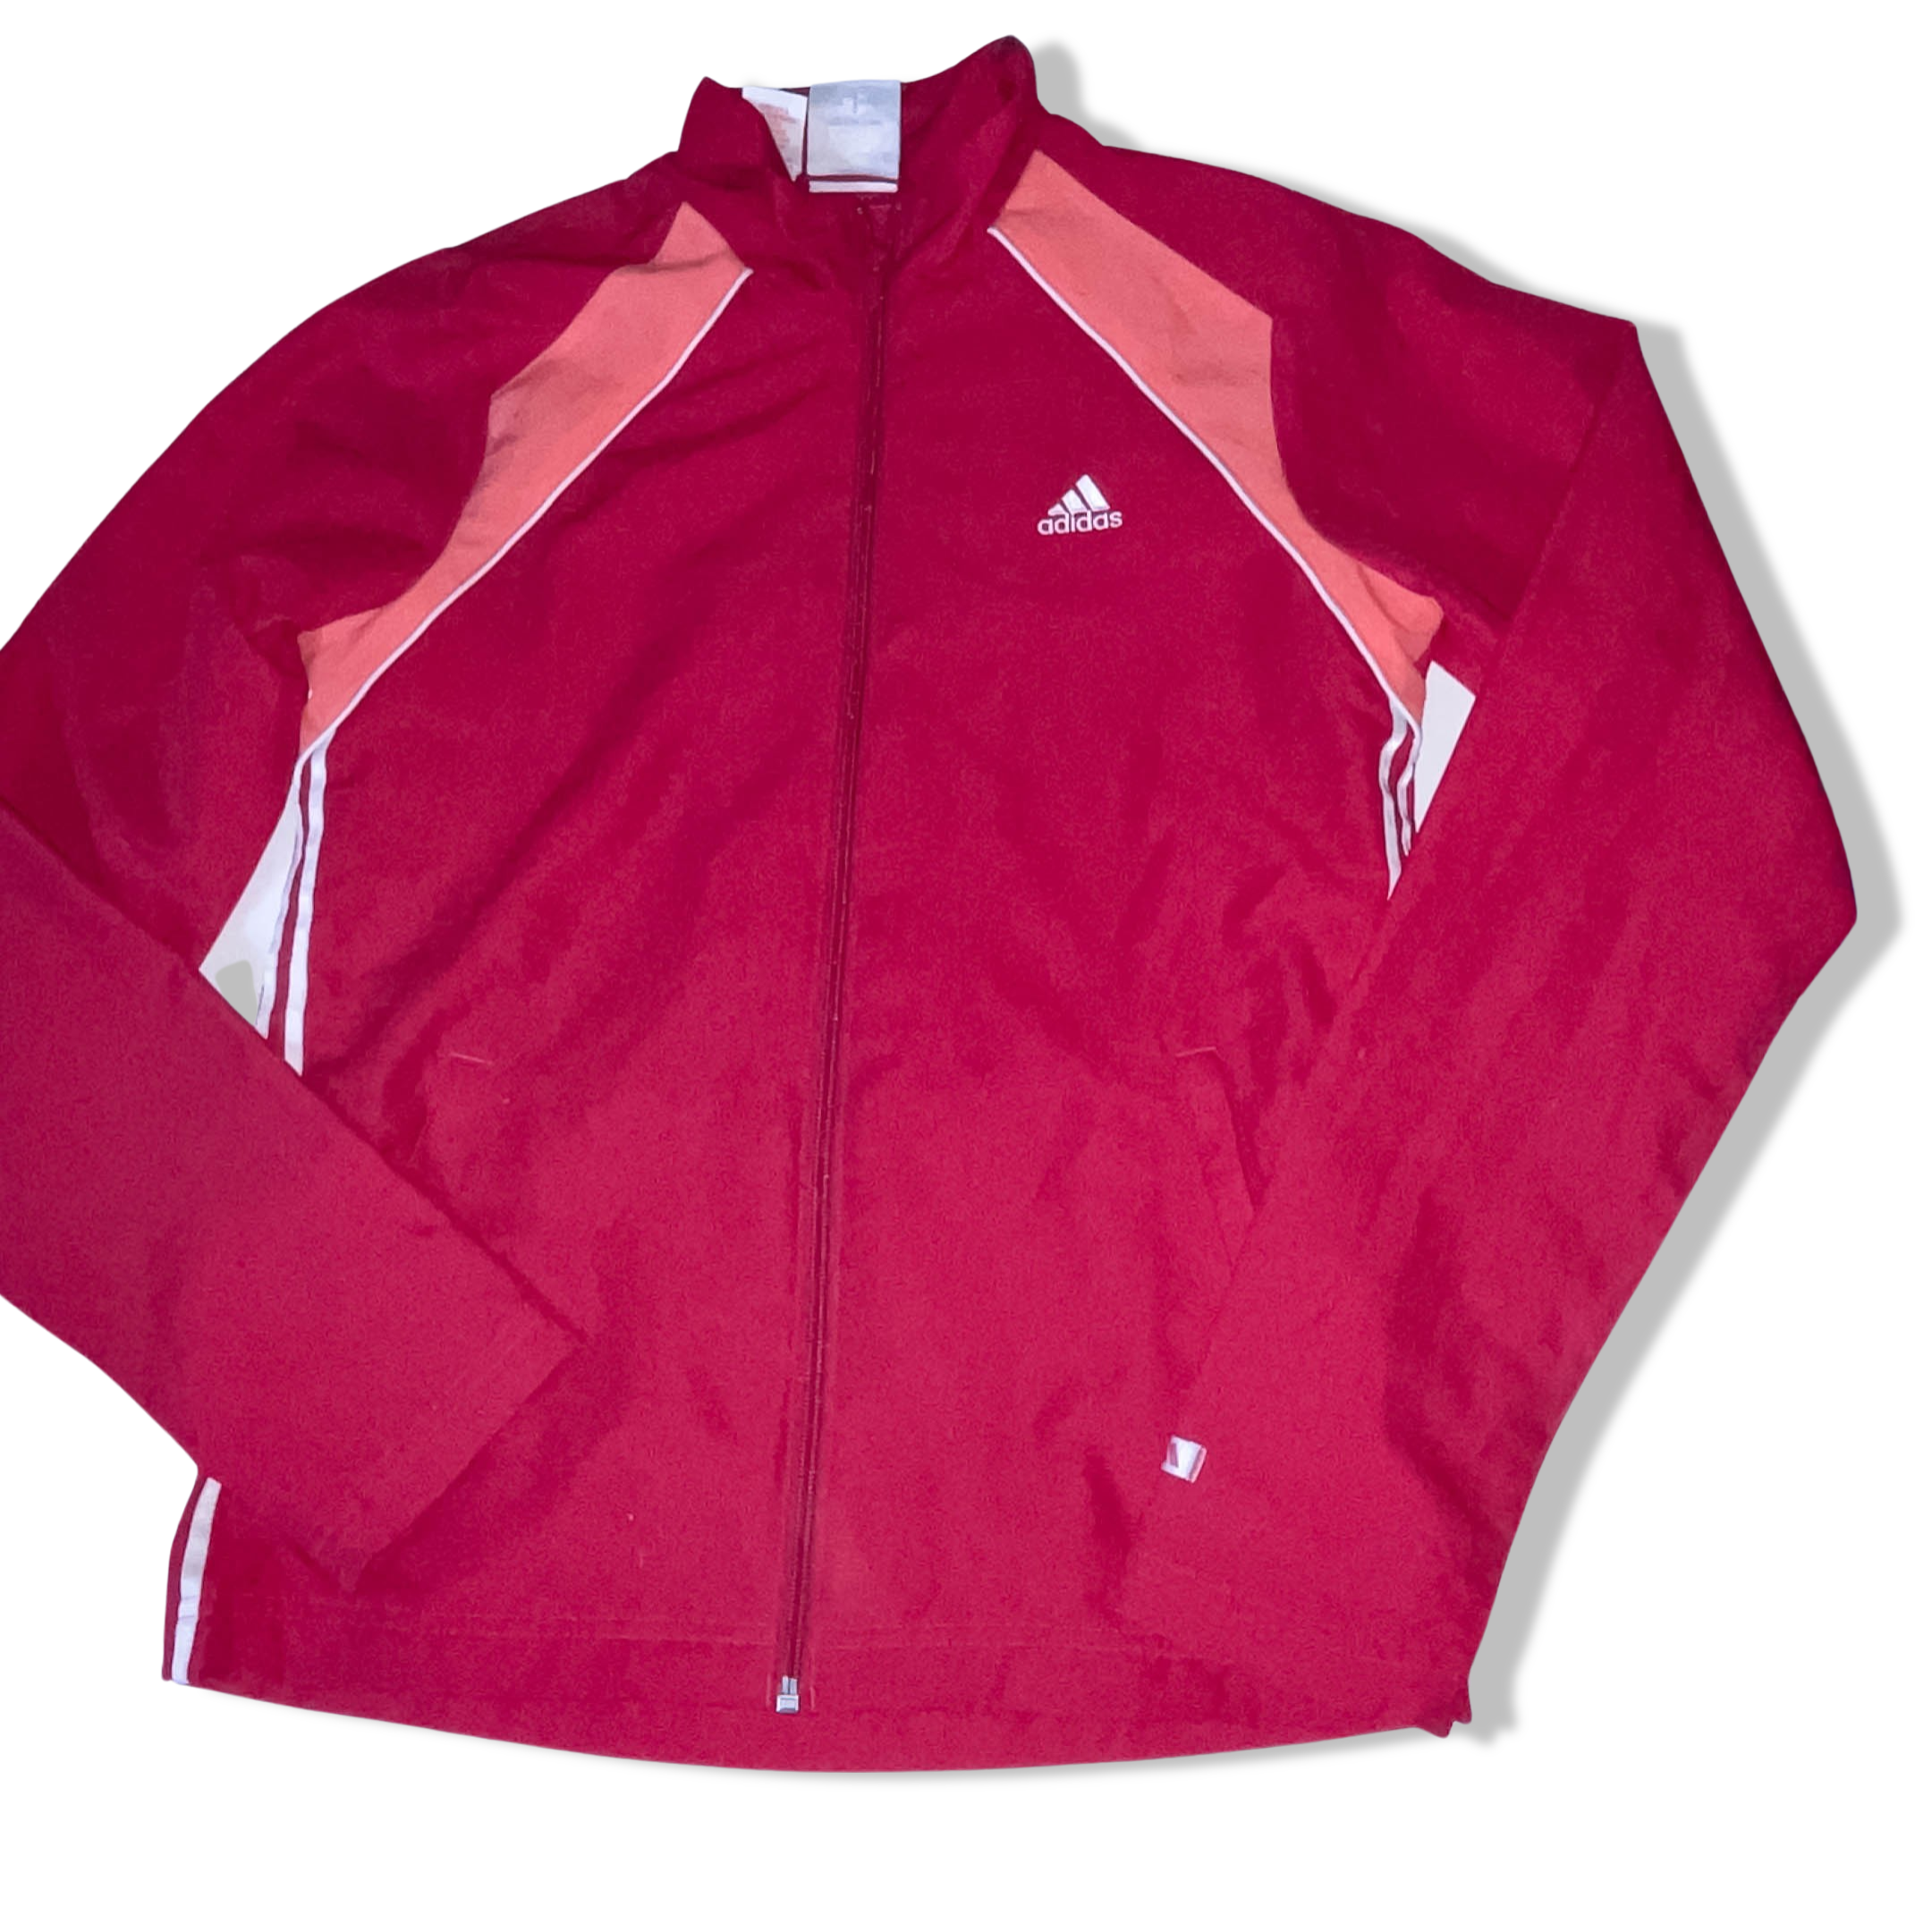 Vintage Adidas womens red full zip up sport track top size M